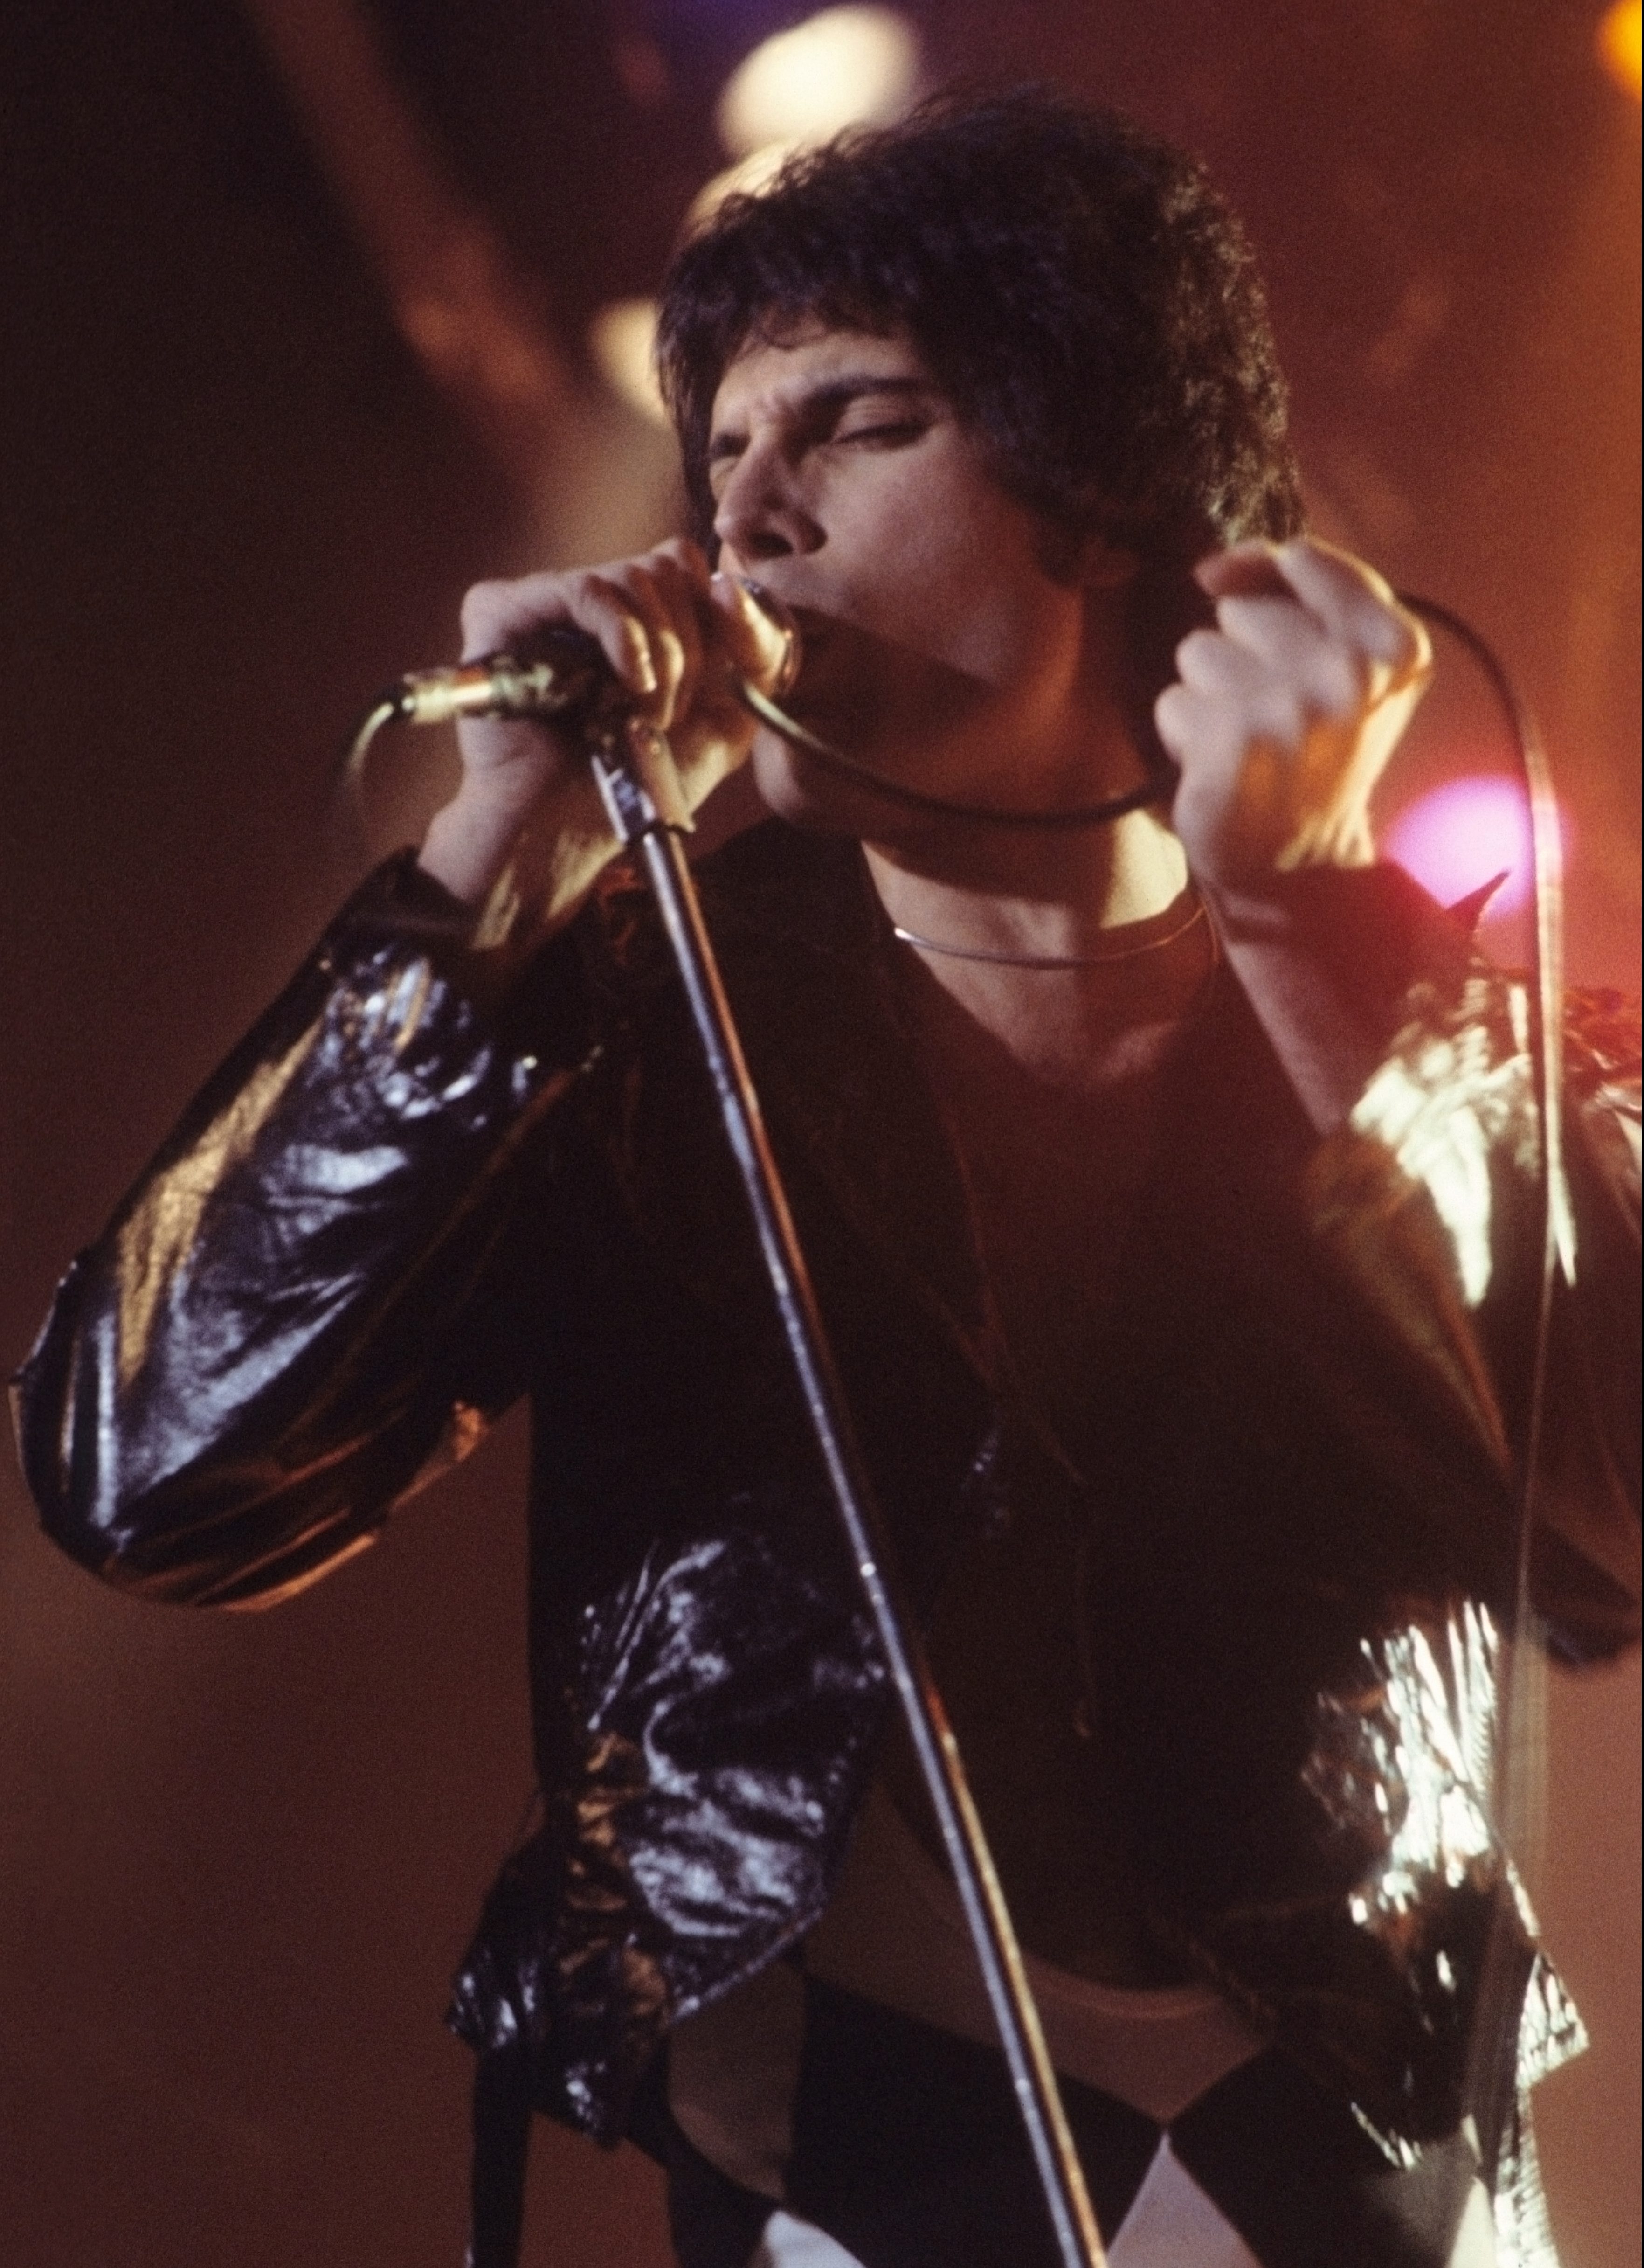 Freddie Mercury (shown here in 1977) is gone but his music lives on in ‘We Will Rock You’ at PMT.